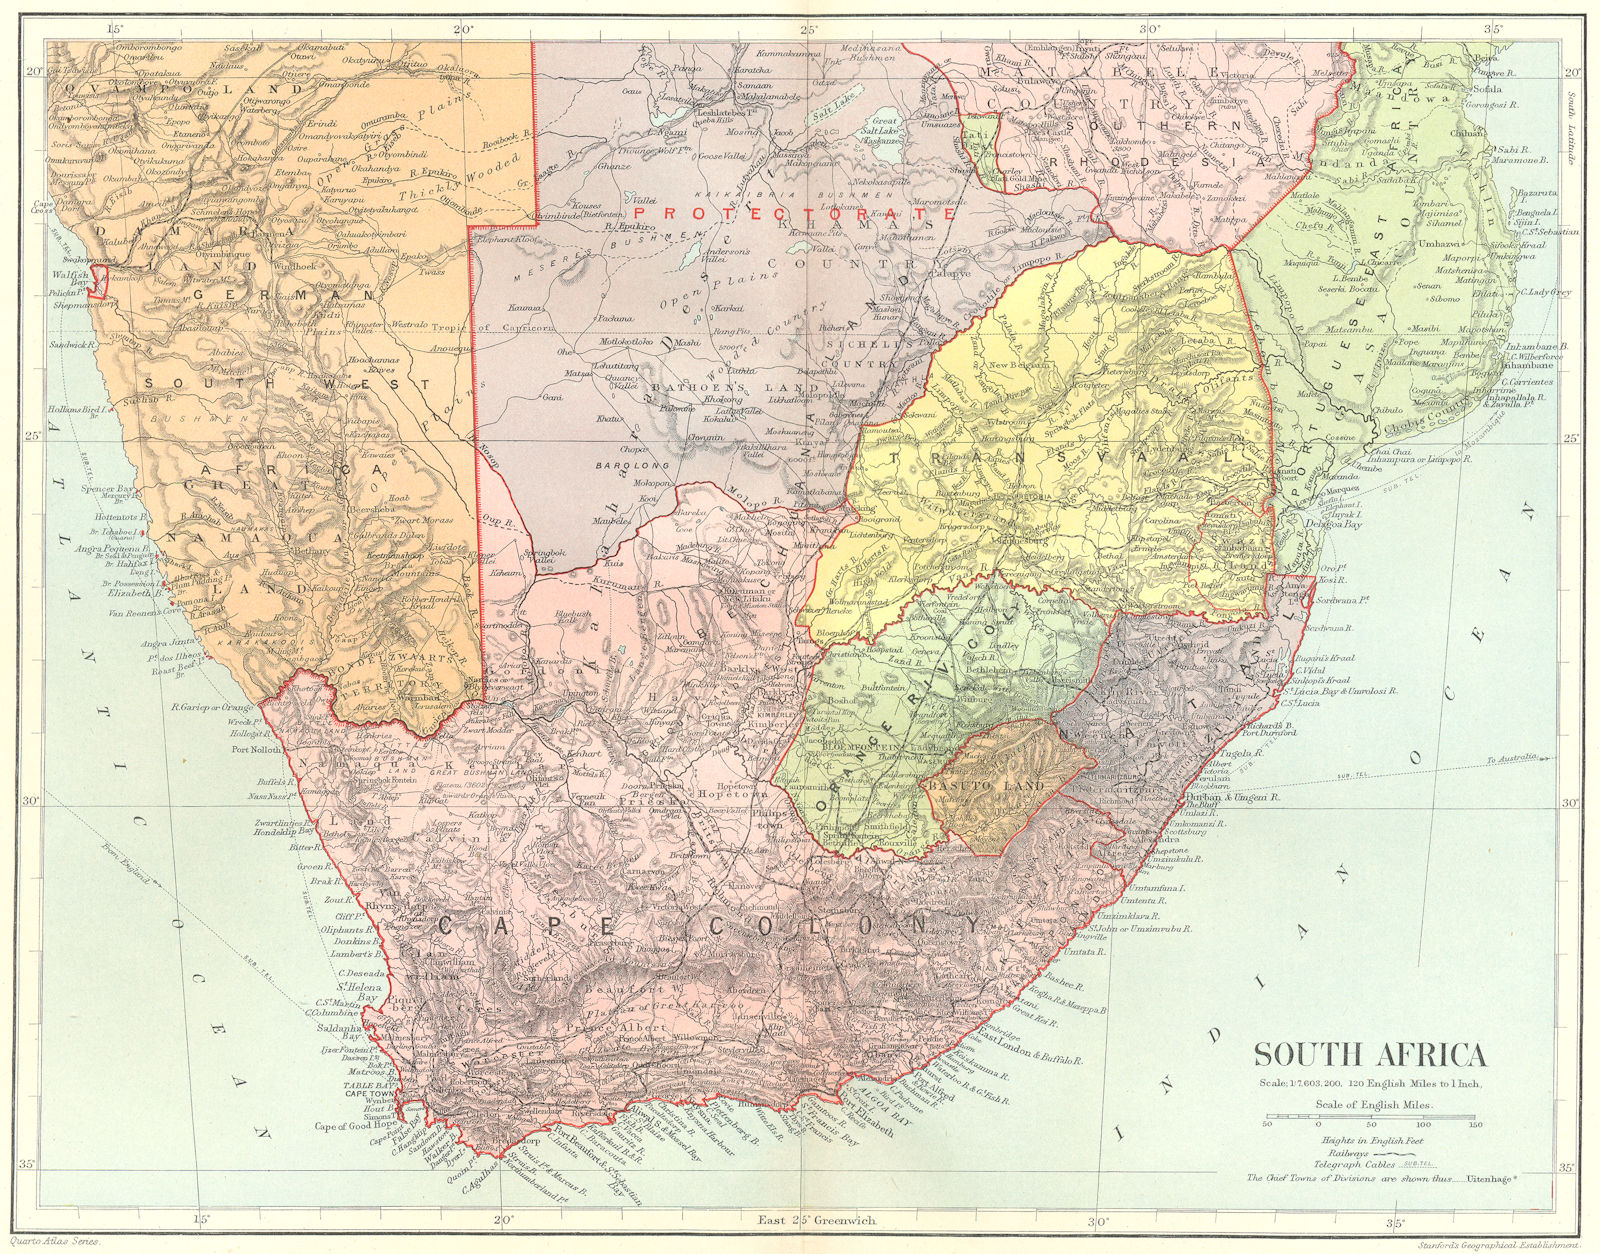 SOUTH AFRICA. Cape Colony Orange River Colony Transvaal Natal.STANFORD 1906 map